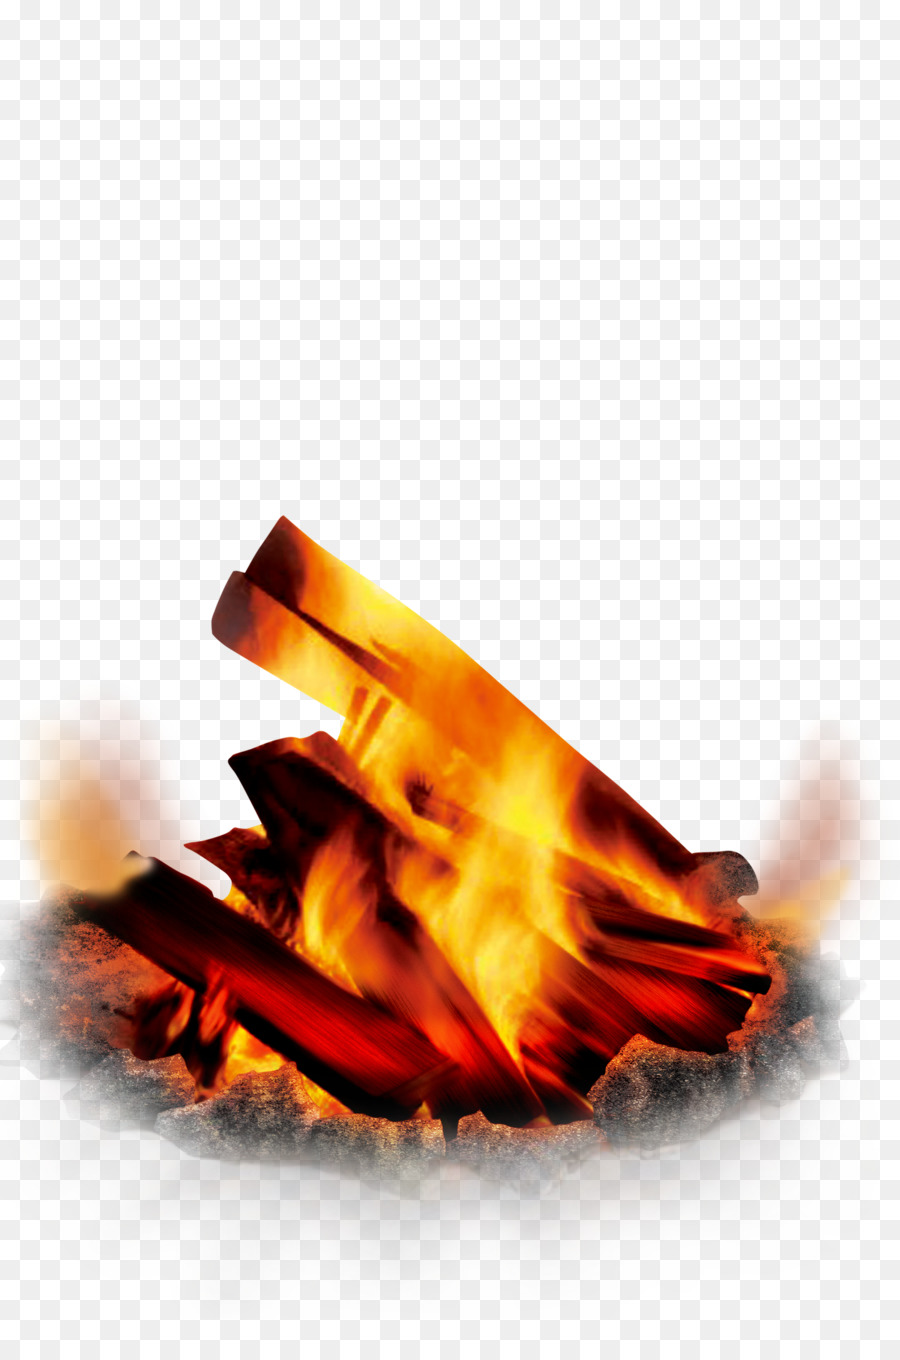 Flame Bonfire - Campfire pictures png download - 1701*2551 - Free Transparent Flame png Download.